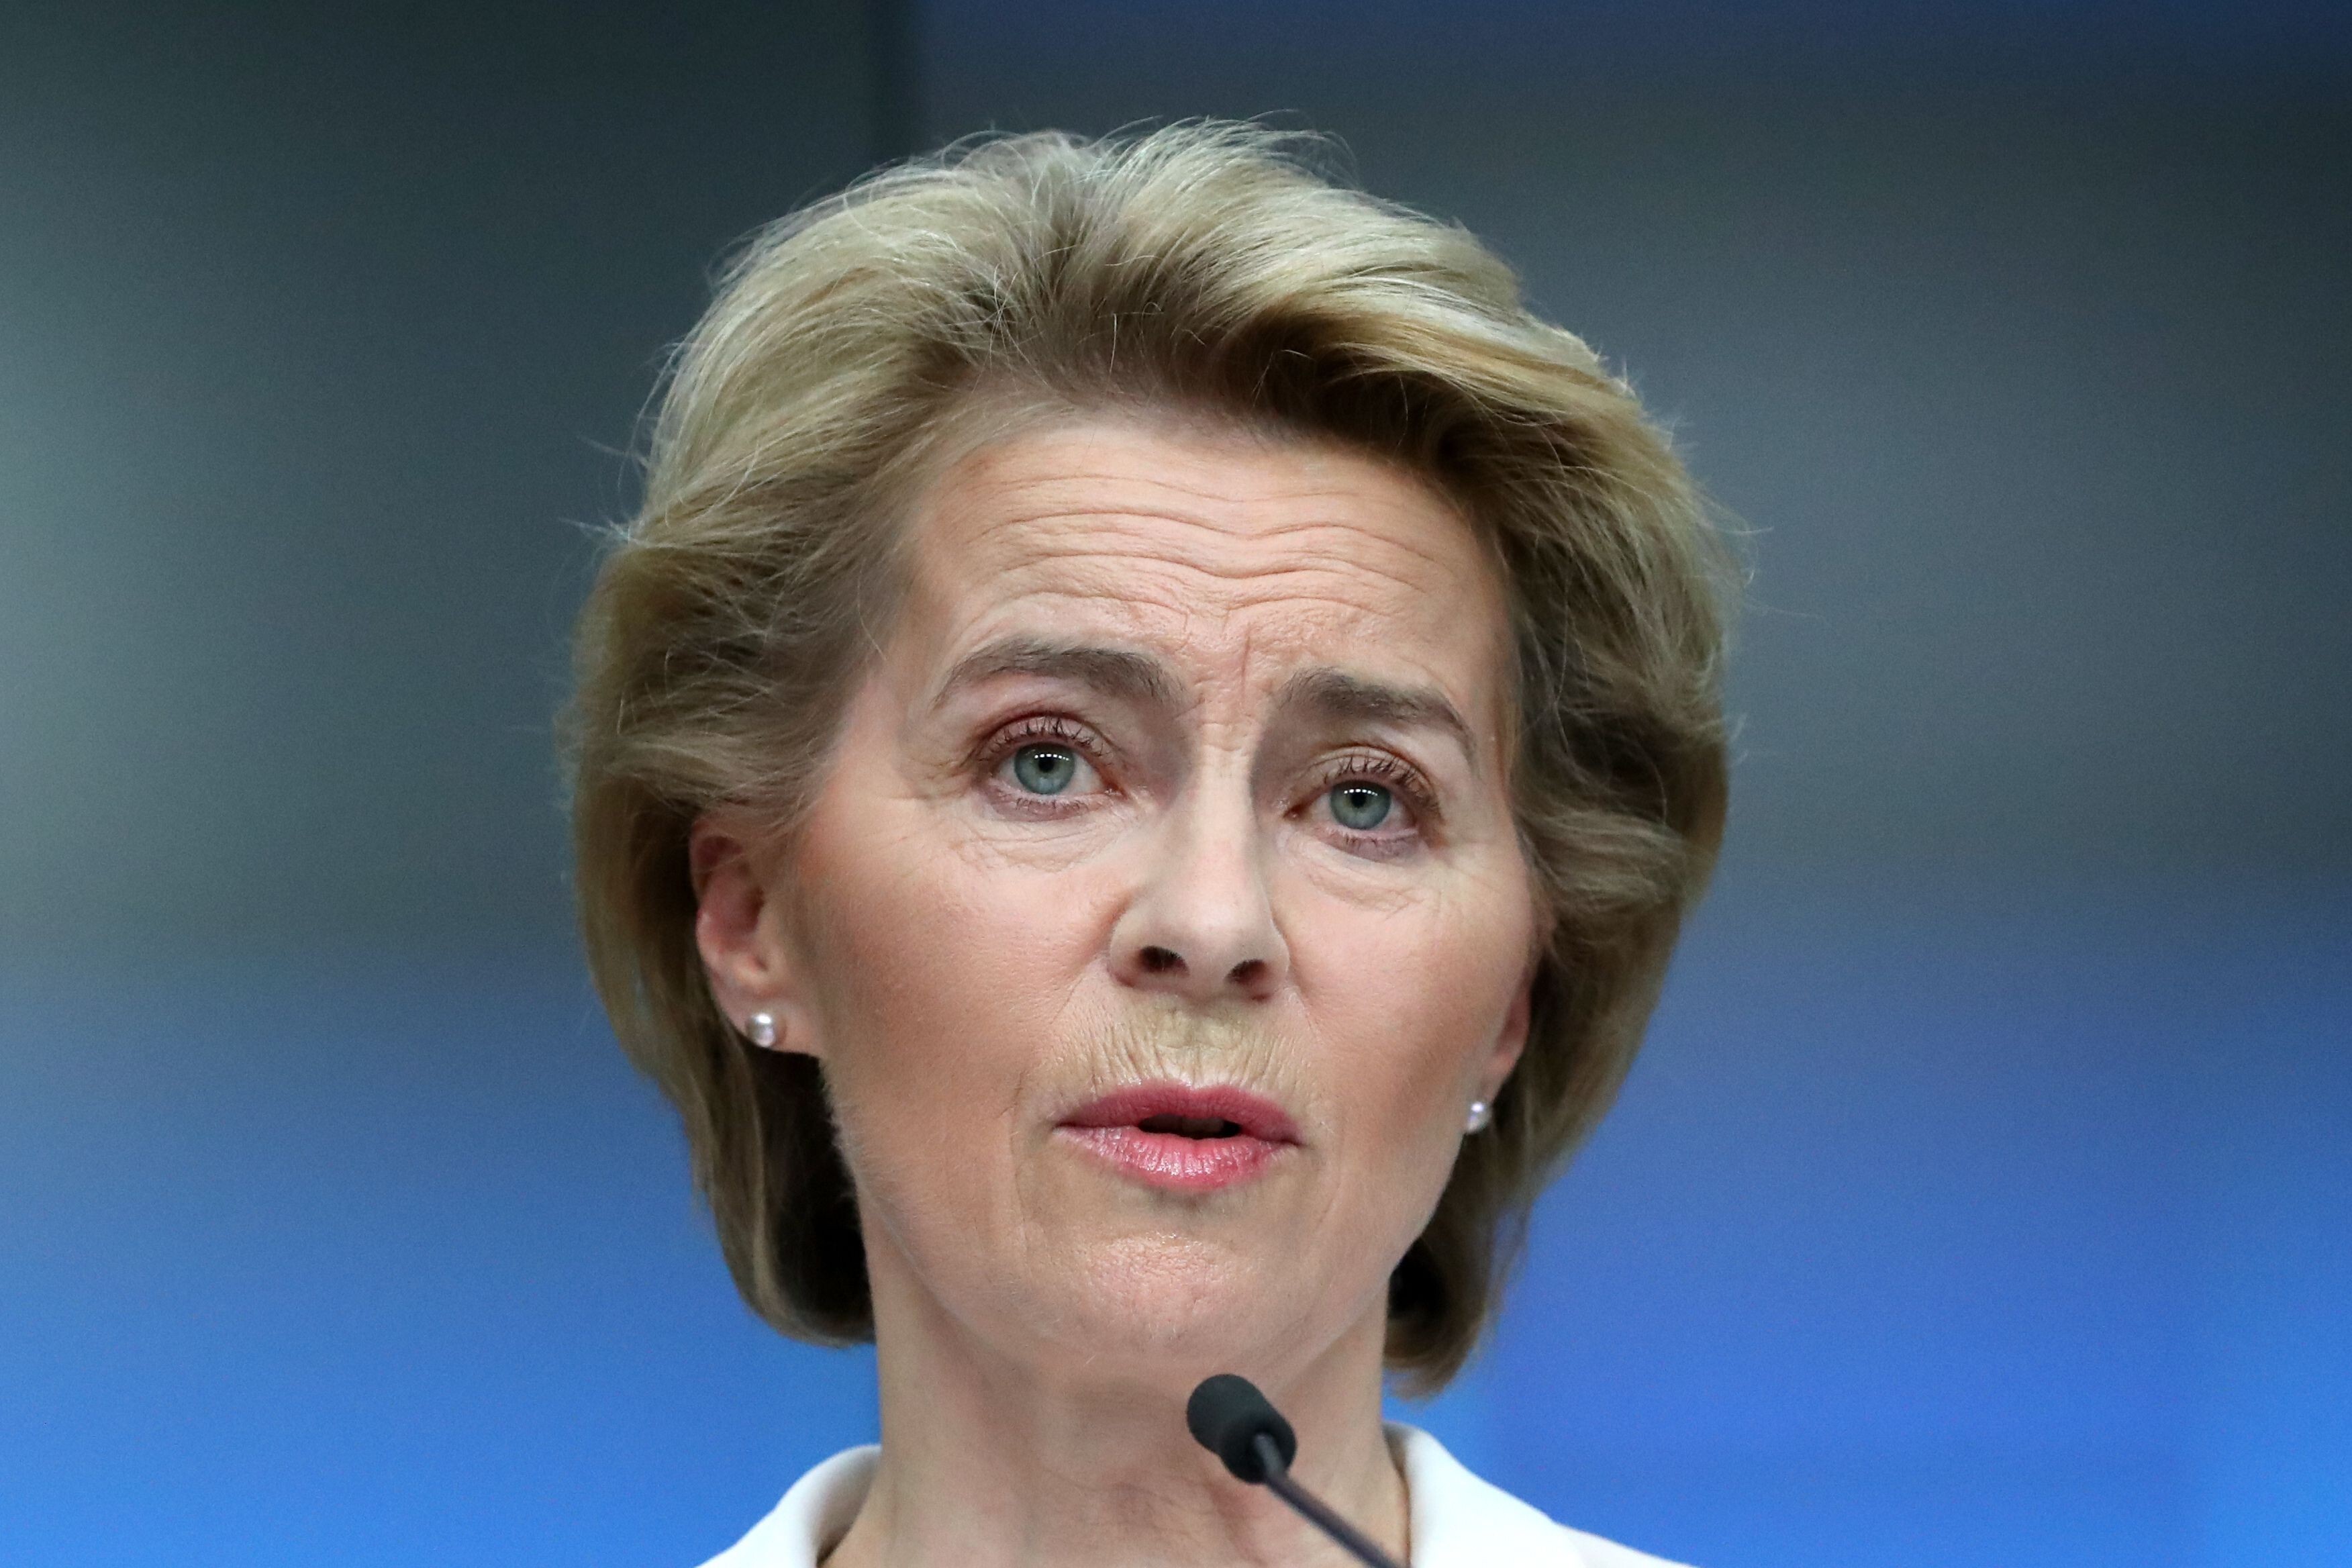 European Commission President Ursula von der Leyen said the law “does not conform with China’s international commitments”. Photo: AFP